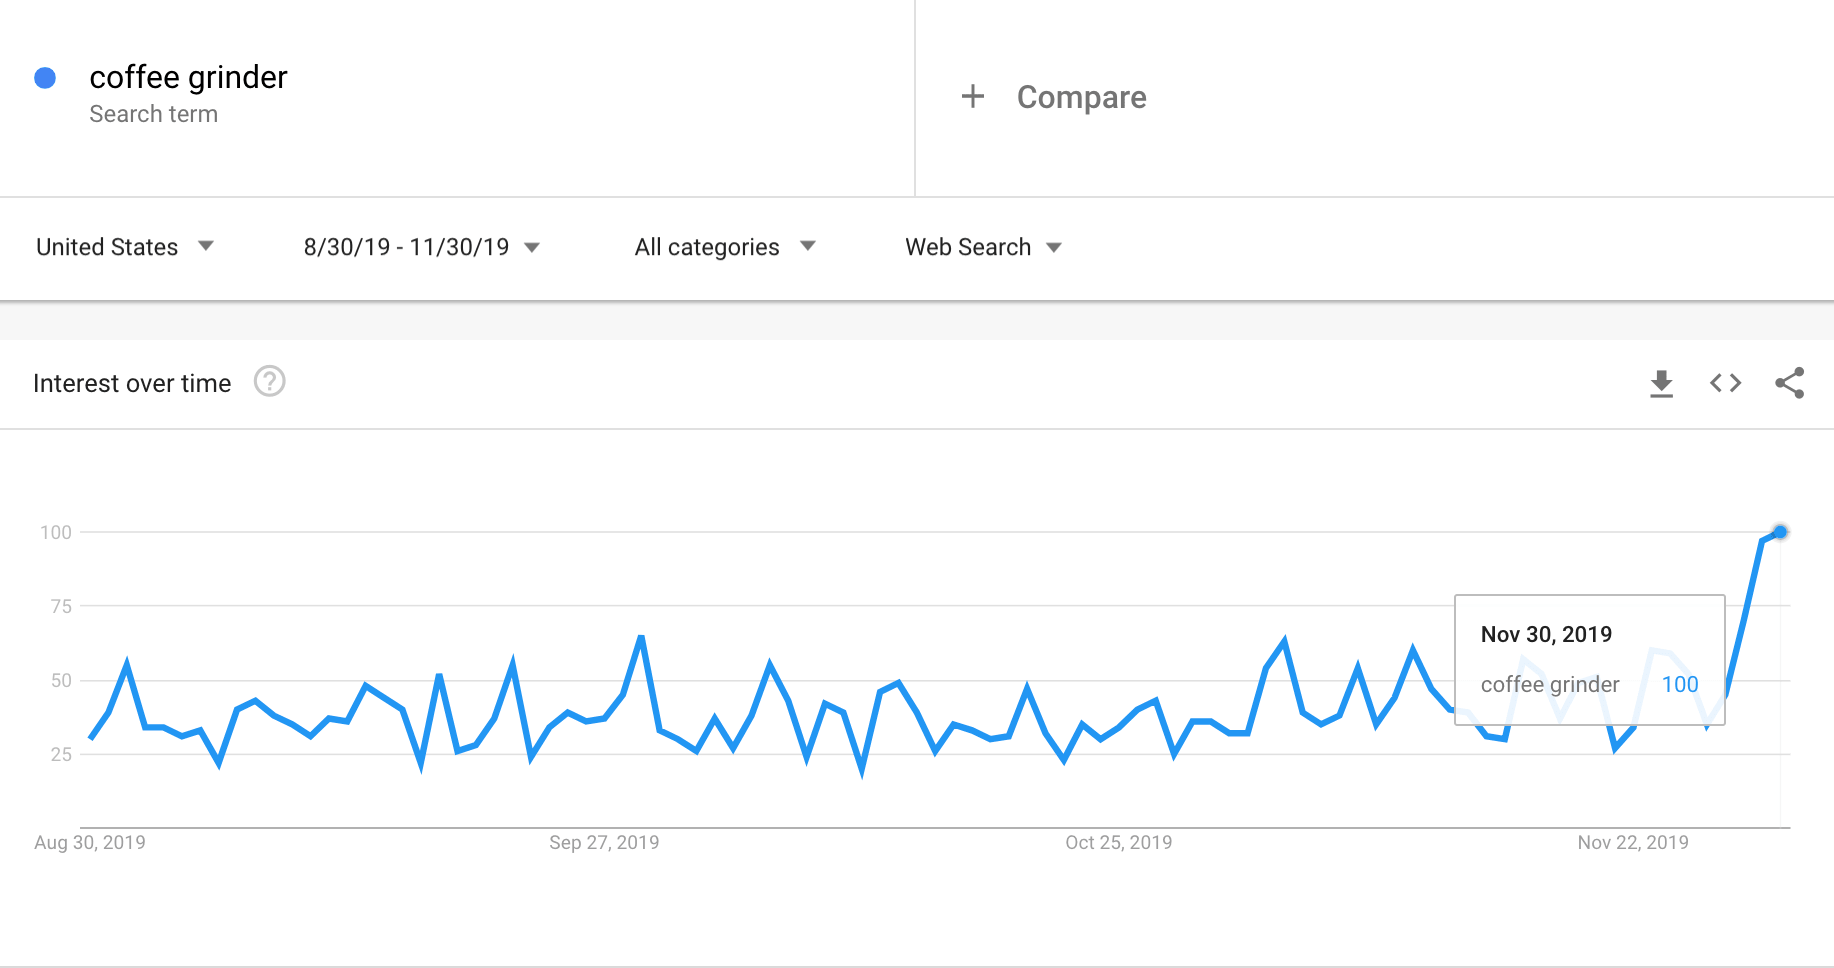 Google Trends graph showing the interest in coffee grinders